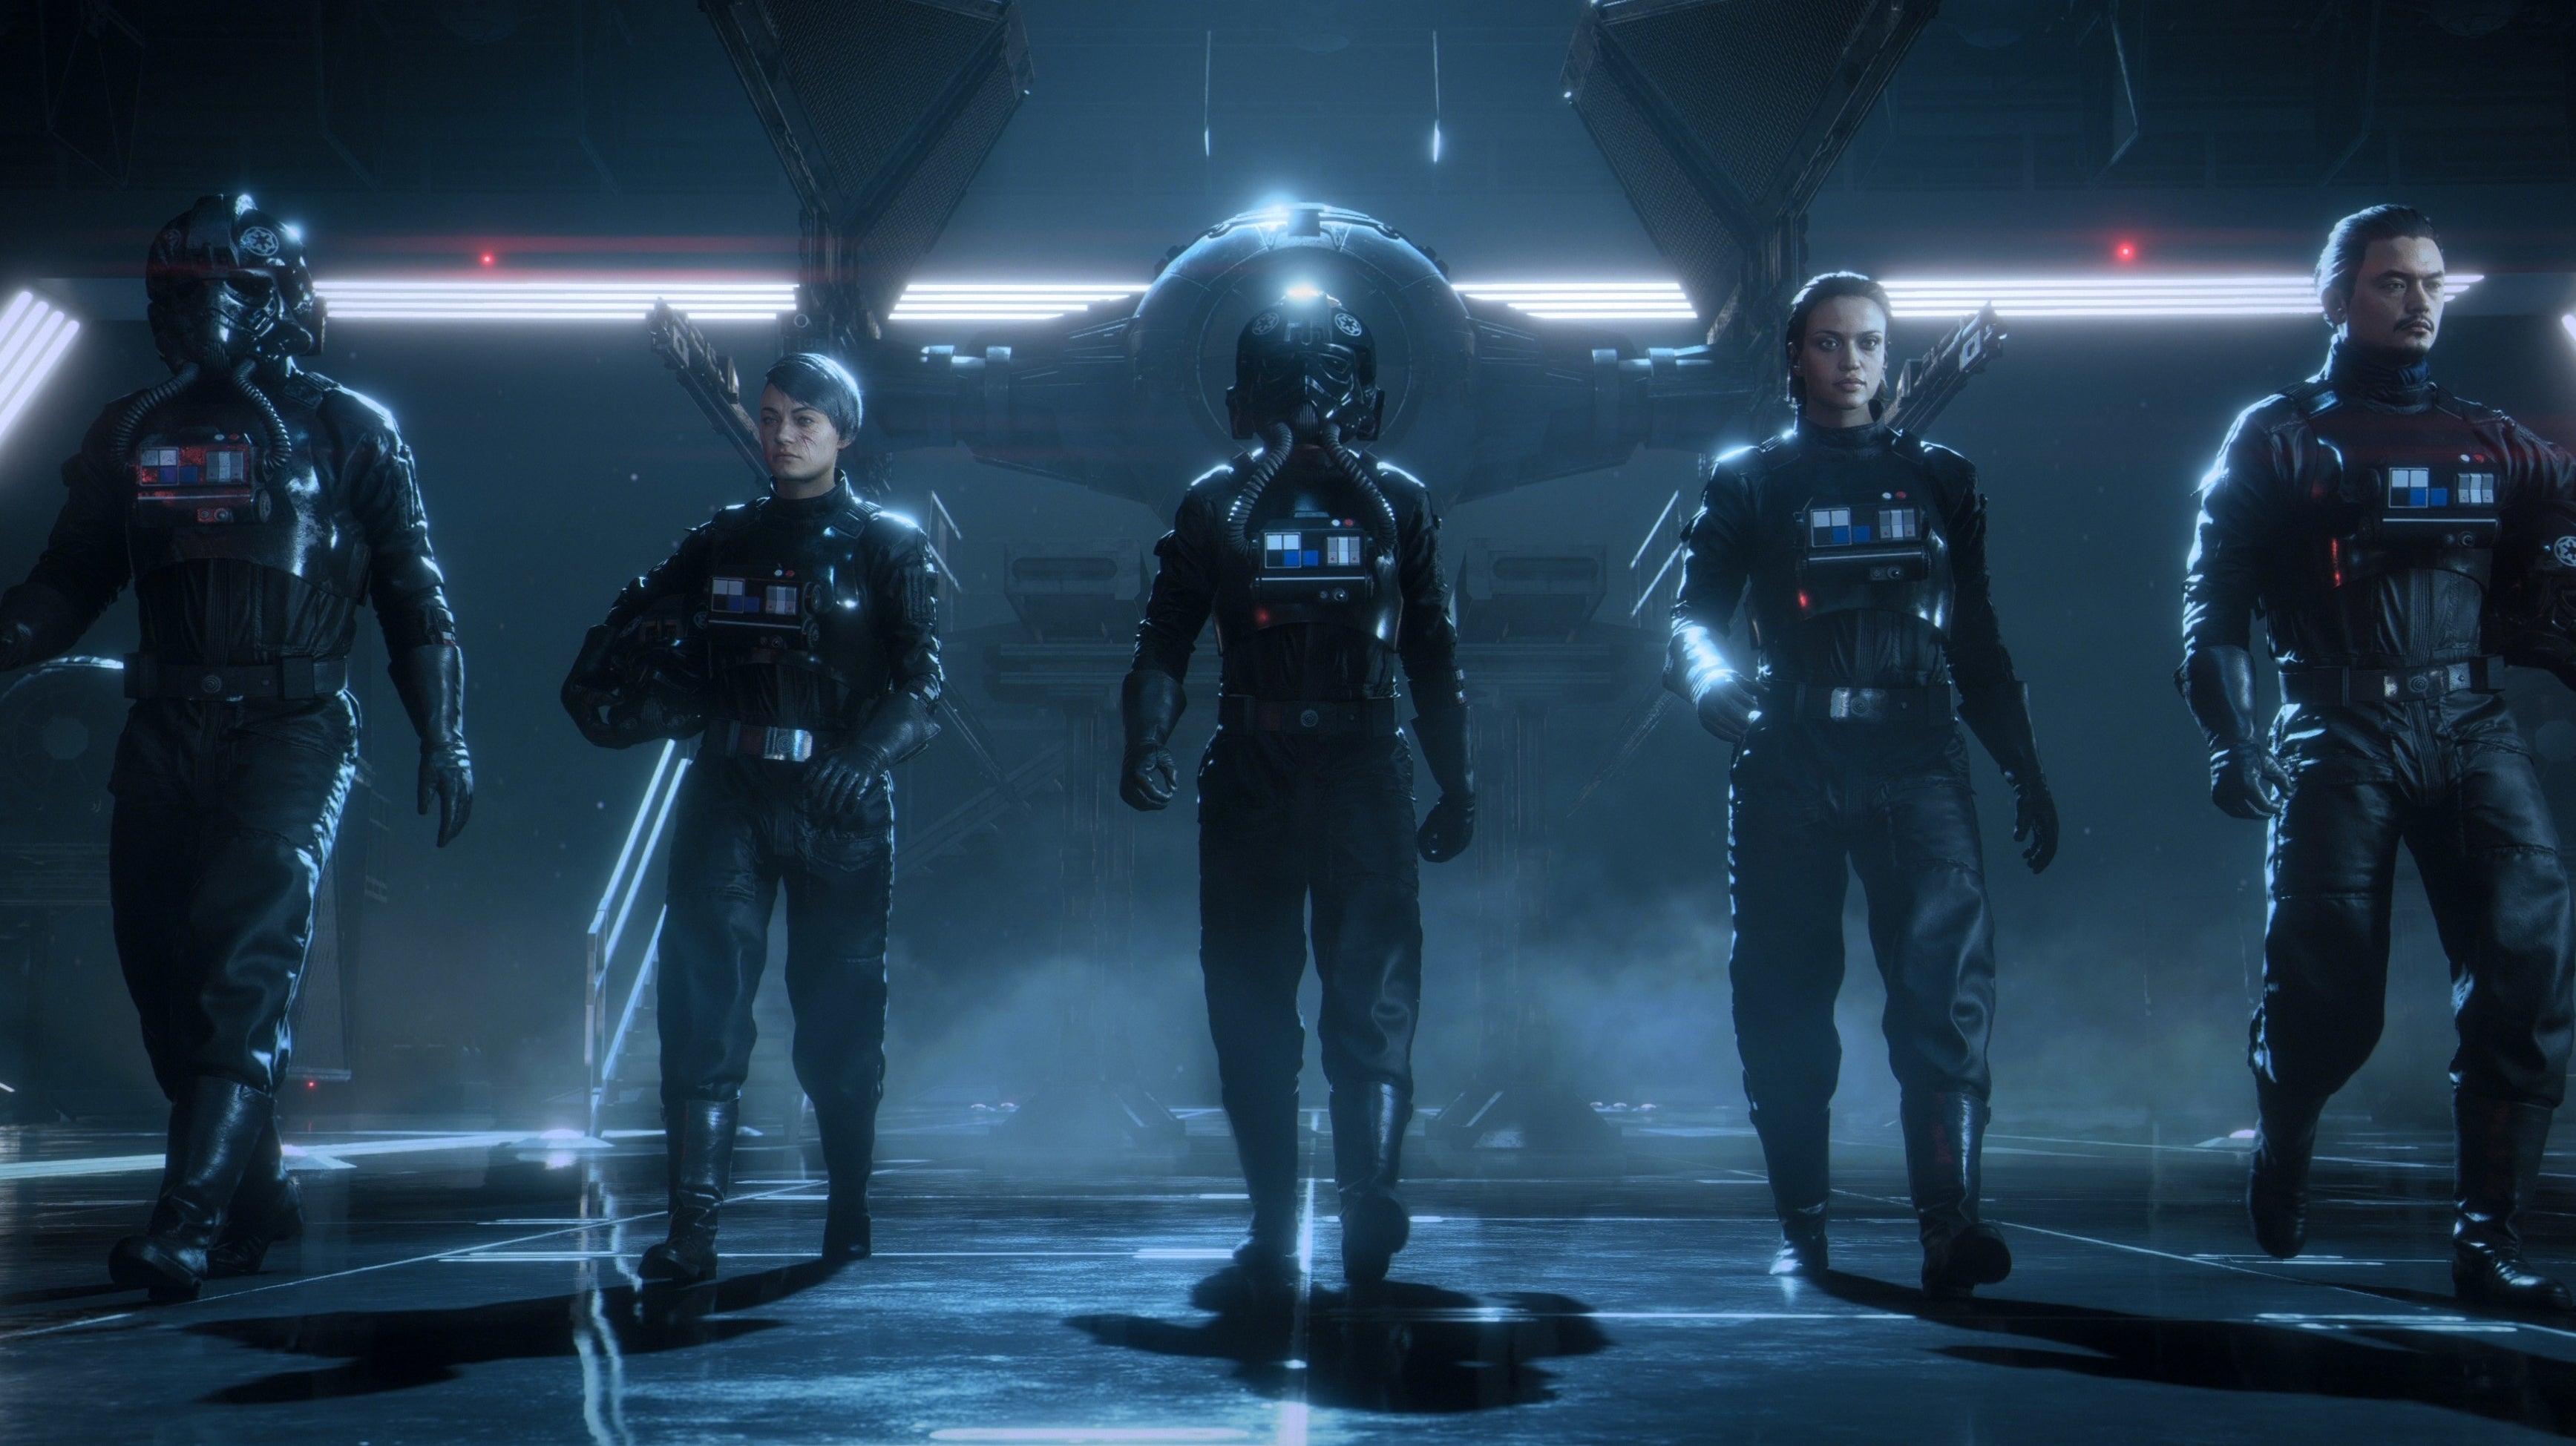 Image for "No plans" for Star Wars: Squadrons DLC or extra modes, EA says